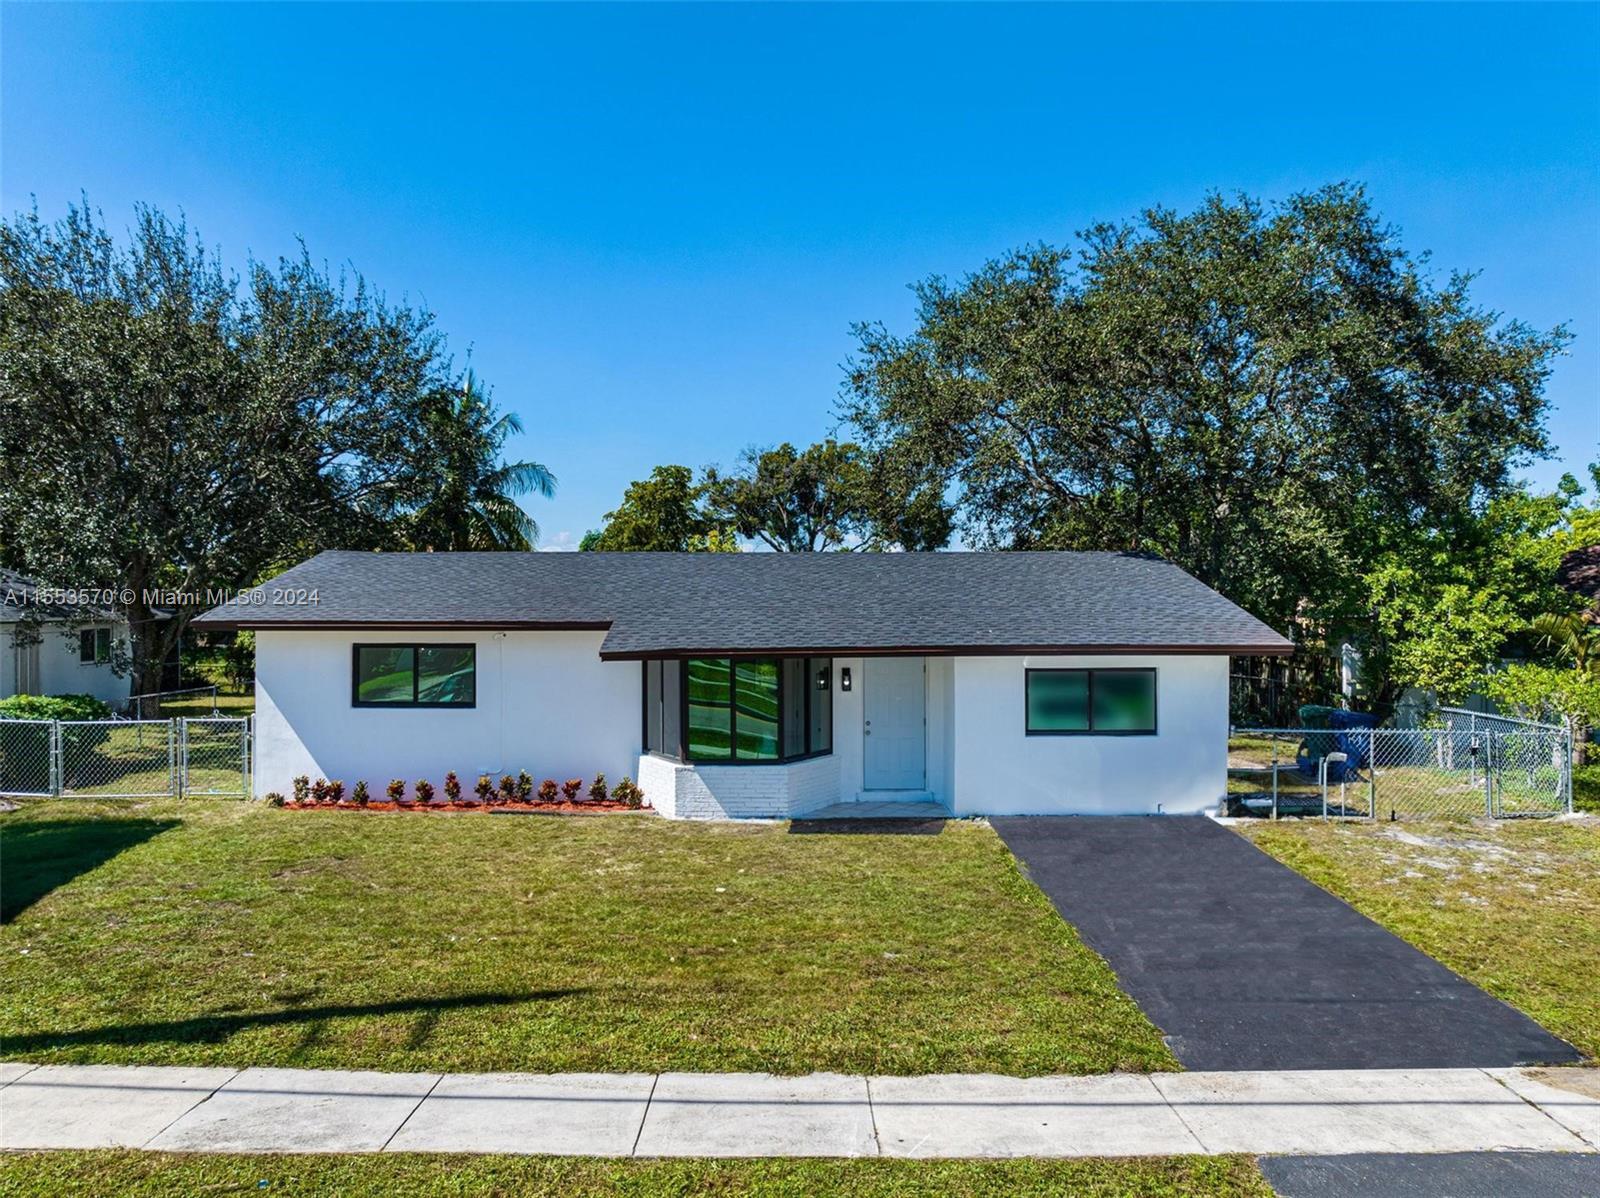 Photo of 1521 NW 55th Ave in Lauderhill, FL